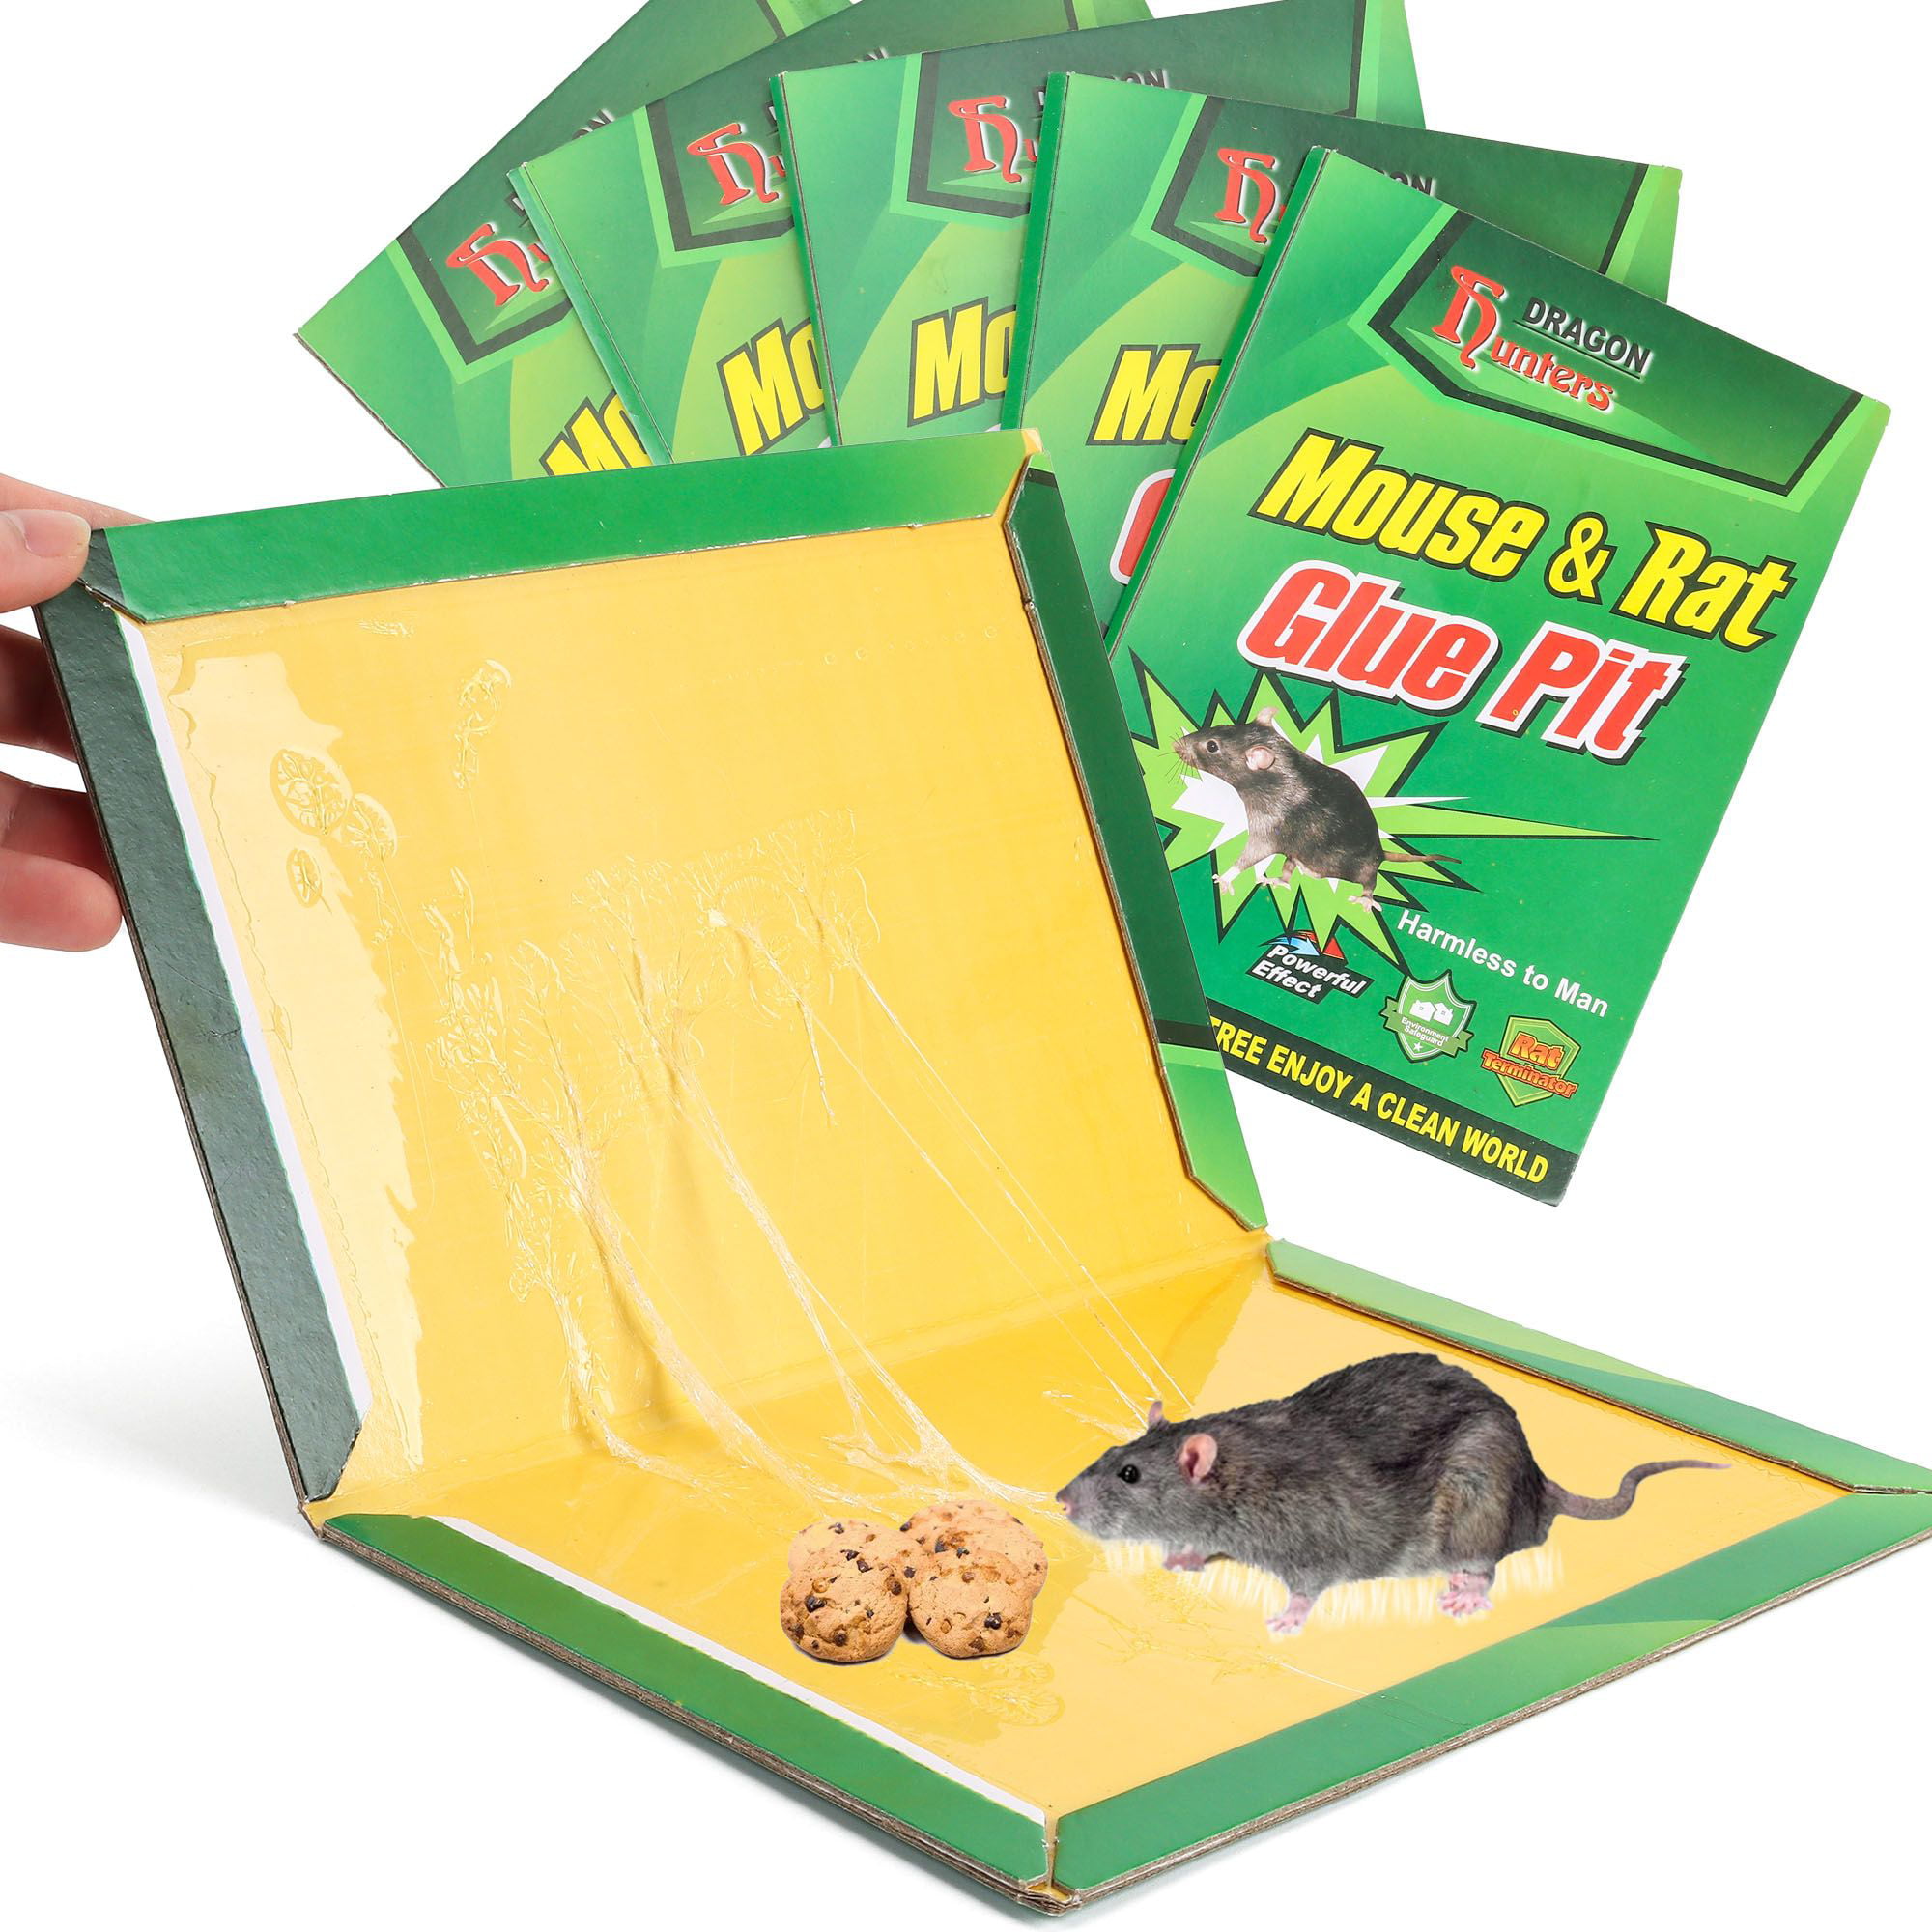 Spencer 8 Pack Large Mouse Glue Traps with Enhanced Stickiness, Rat Mouse Traps, Snake Mouse Traps Sticky Pad Board for House Indoor Outdoor, Heavy